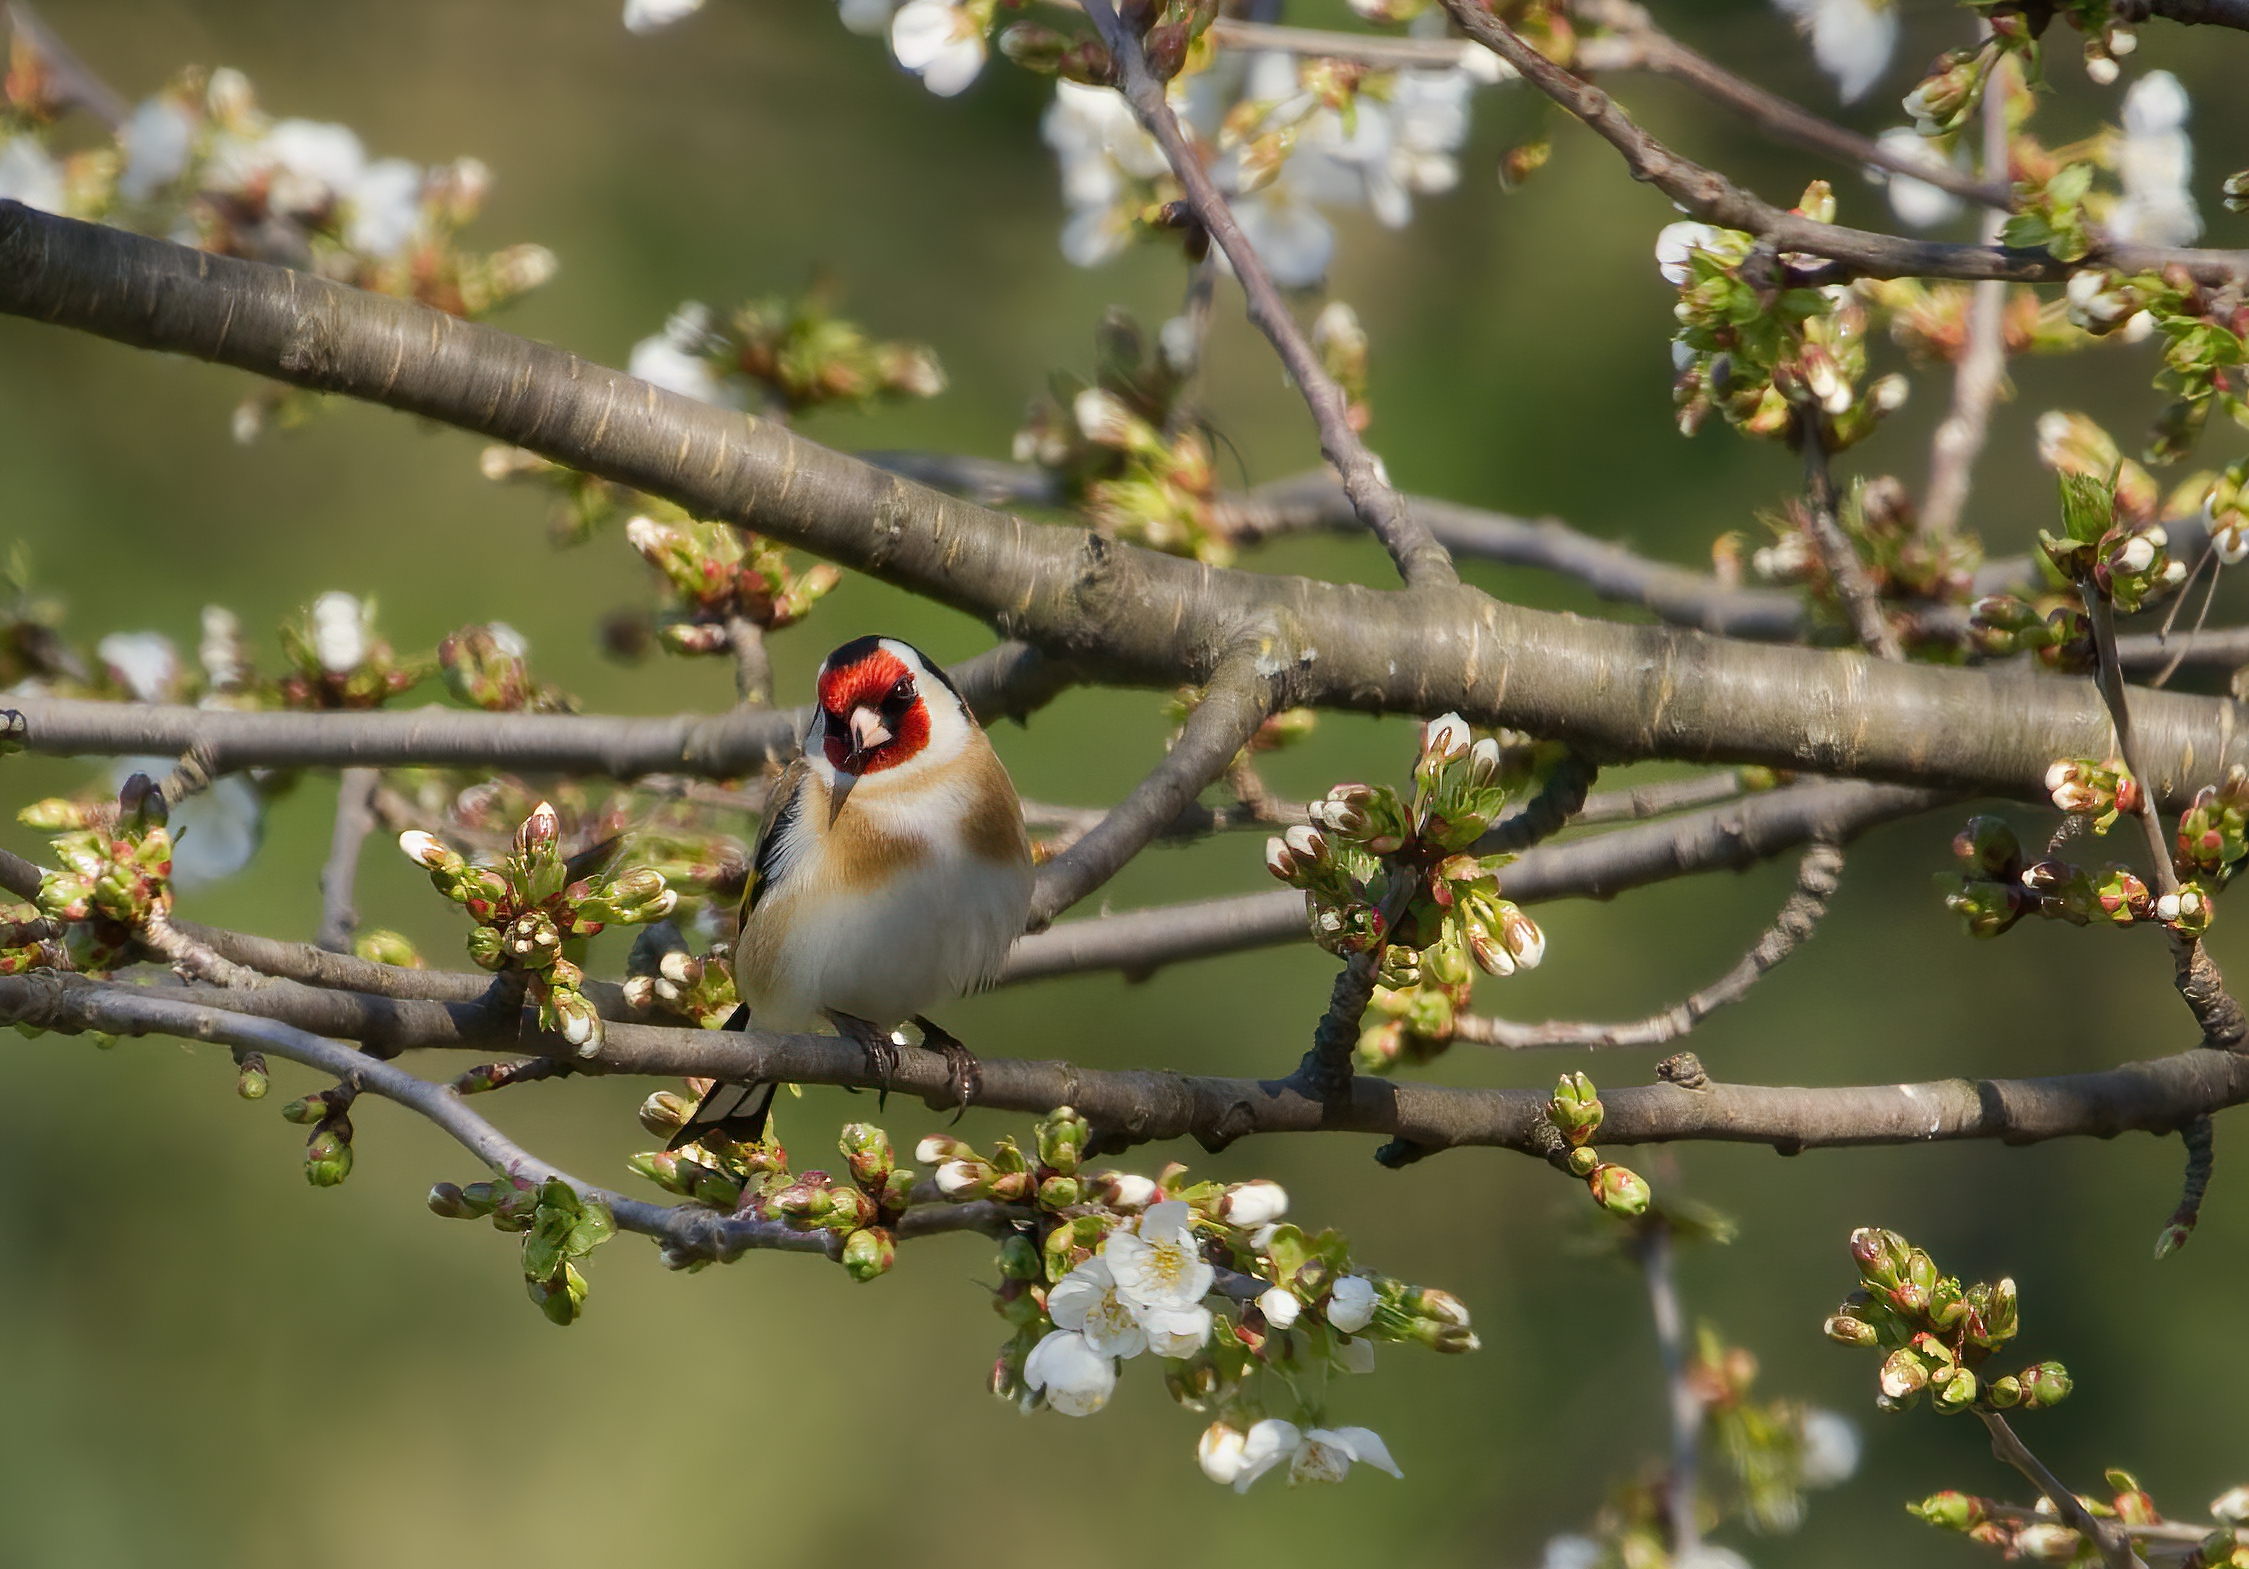 Does a goldfinch make spring?...